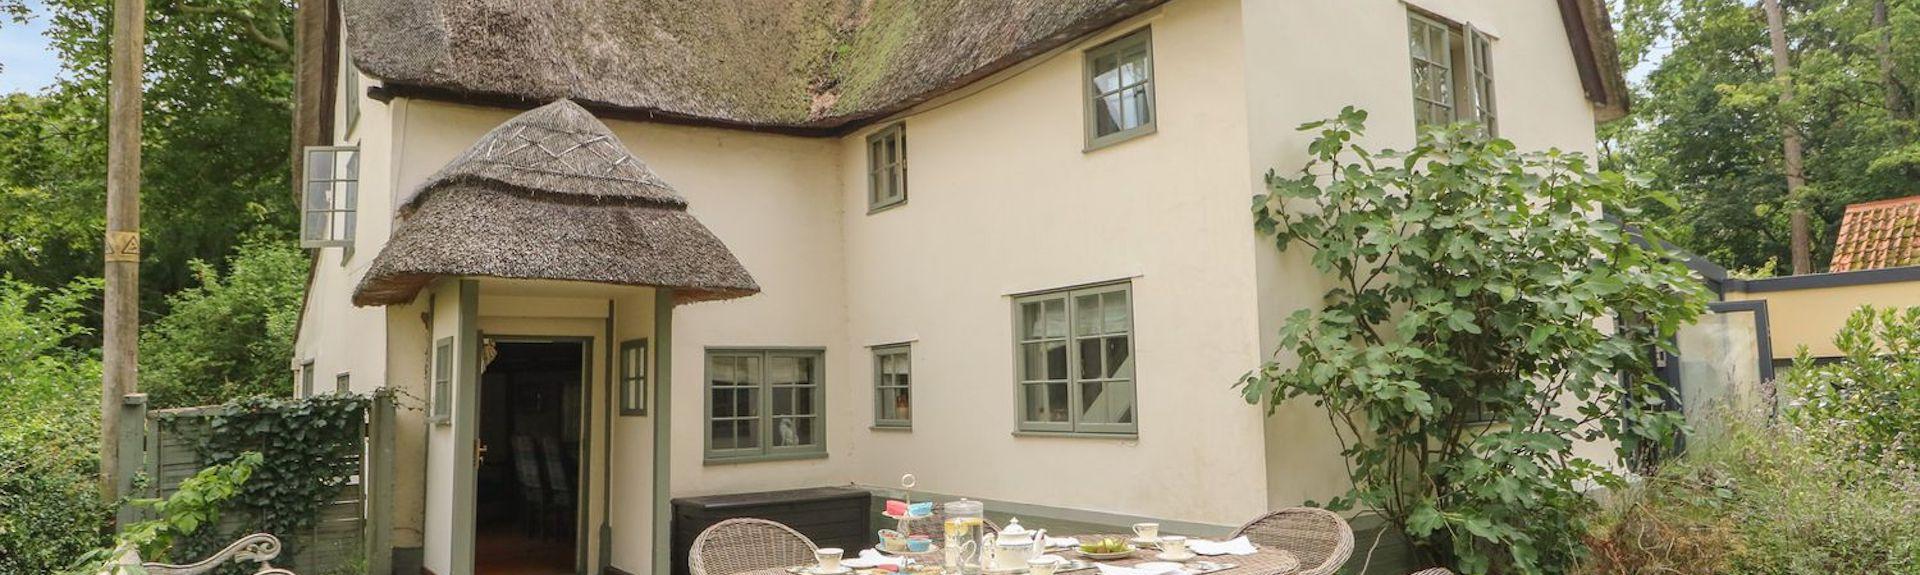 The extrior of  large thatched holiday cottage overlooking a patio garden with whicker picnic table and chairs